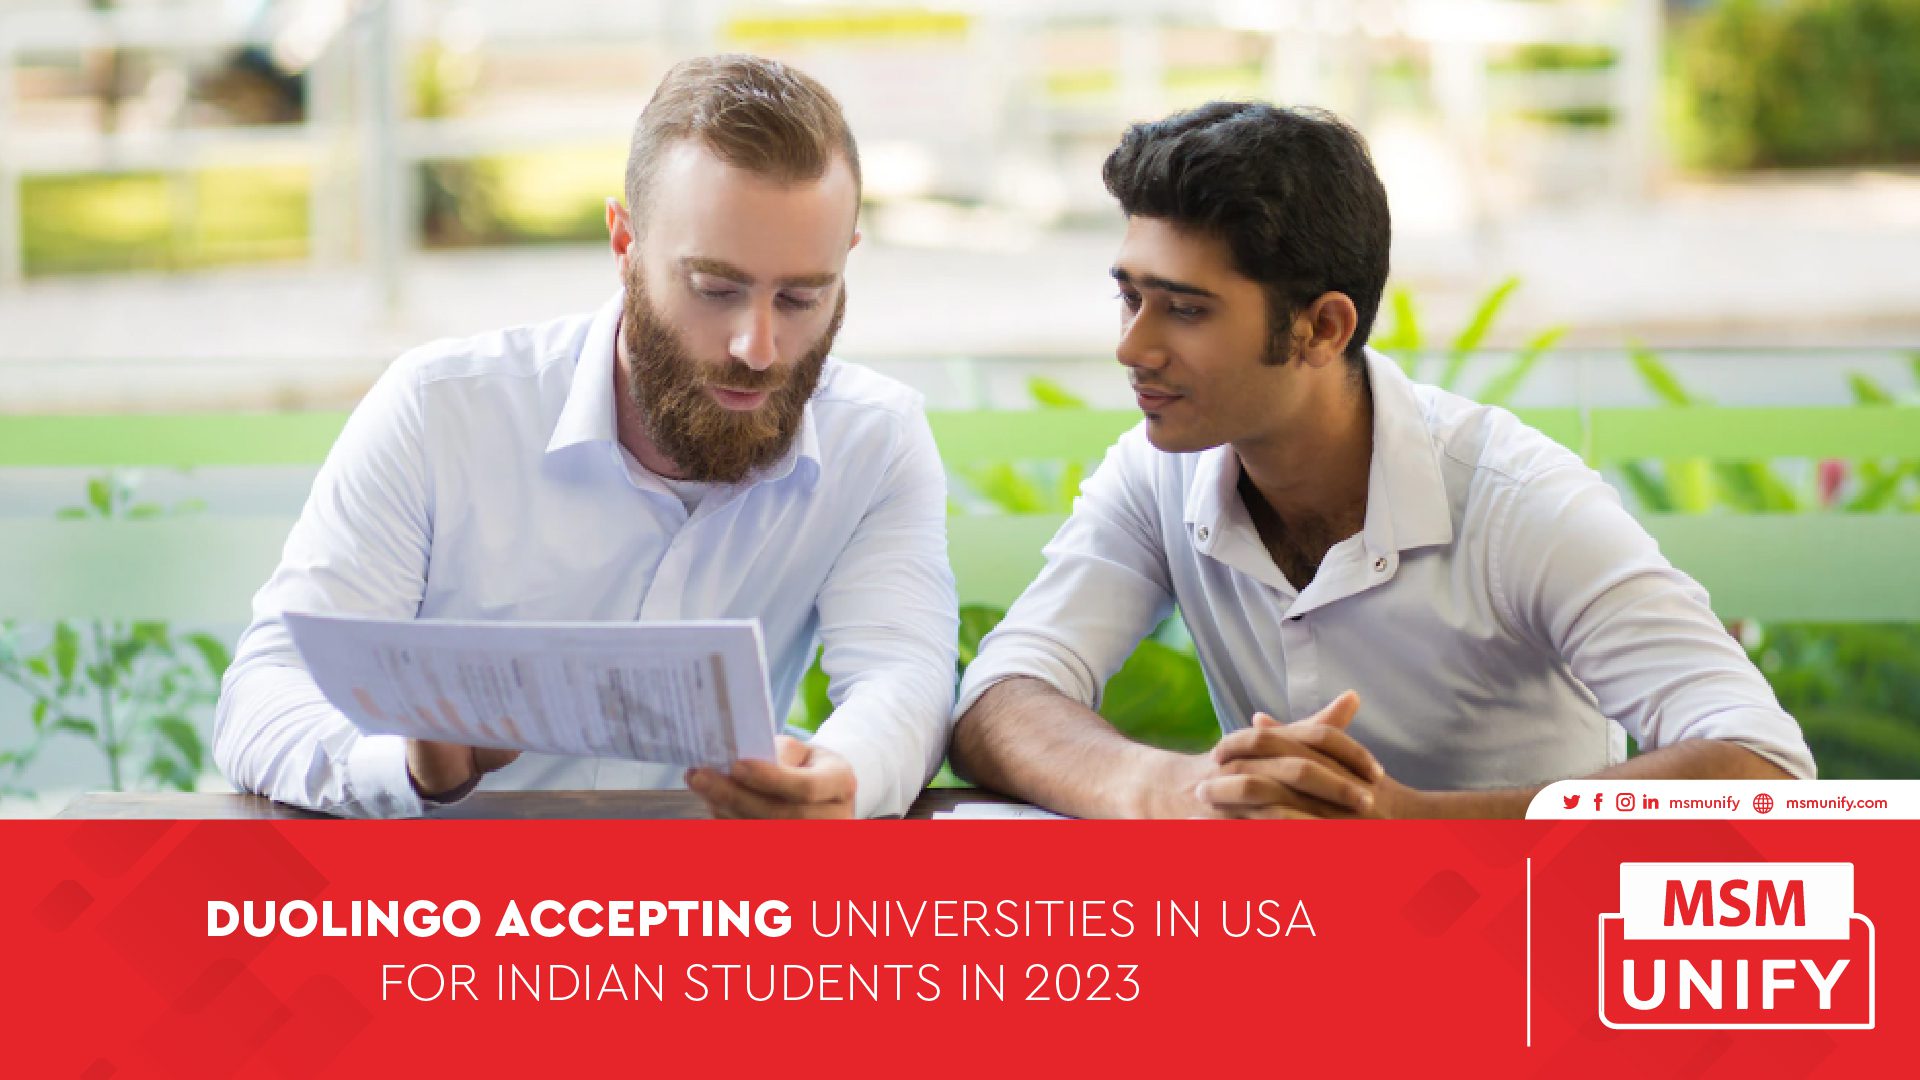 012023 MSM Unify Duolingo Accepting Universities in usa for indian students in 2023 01